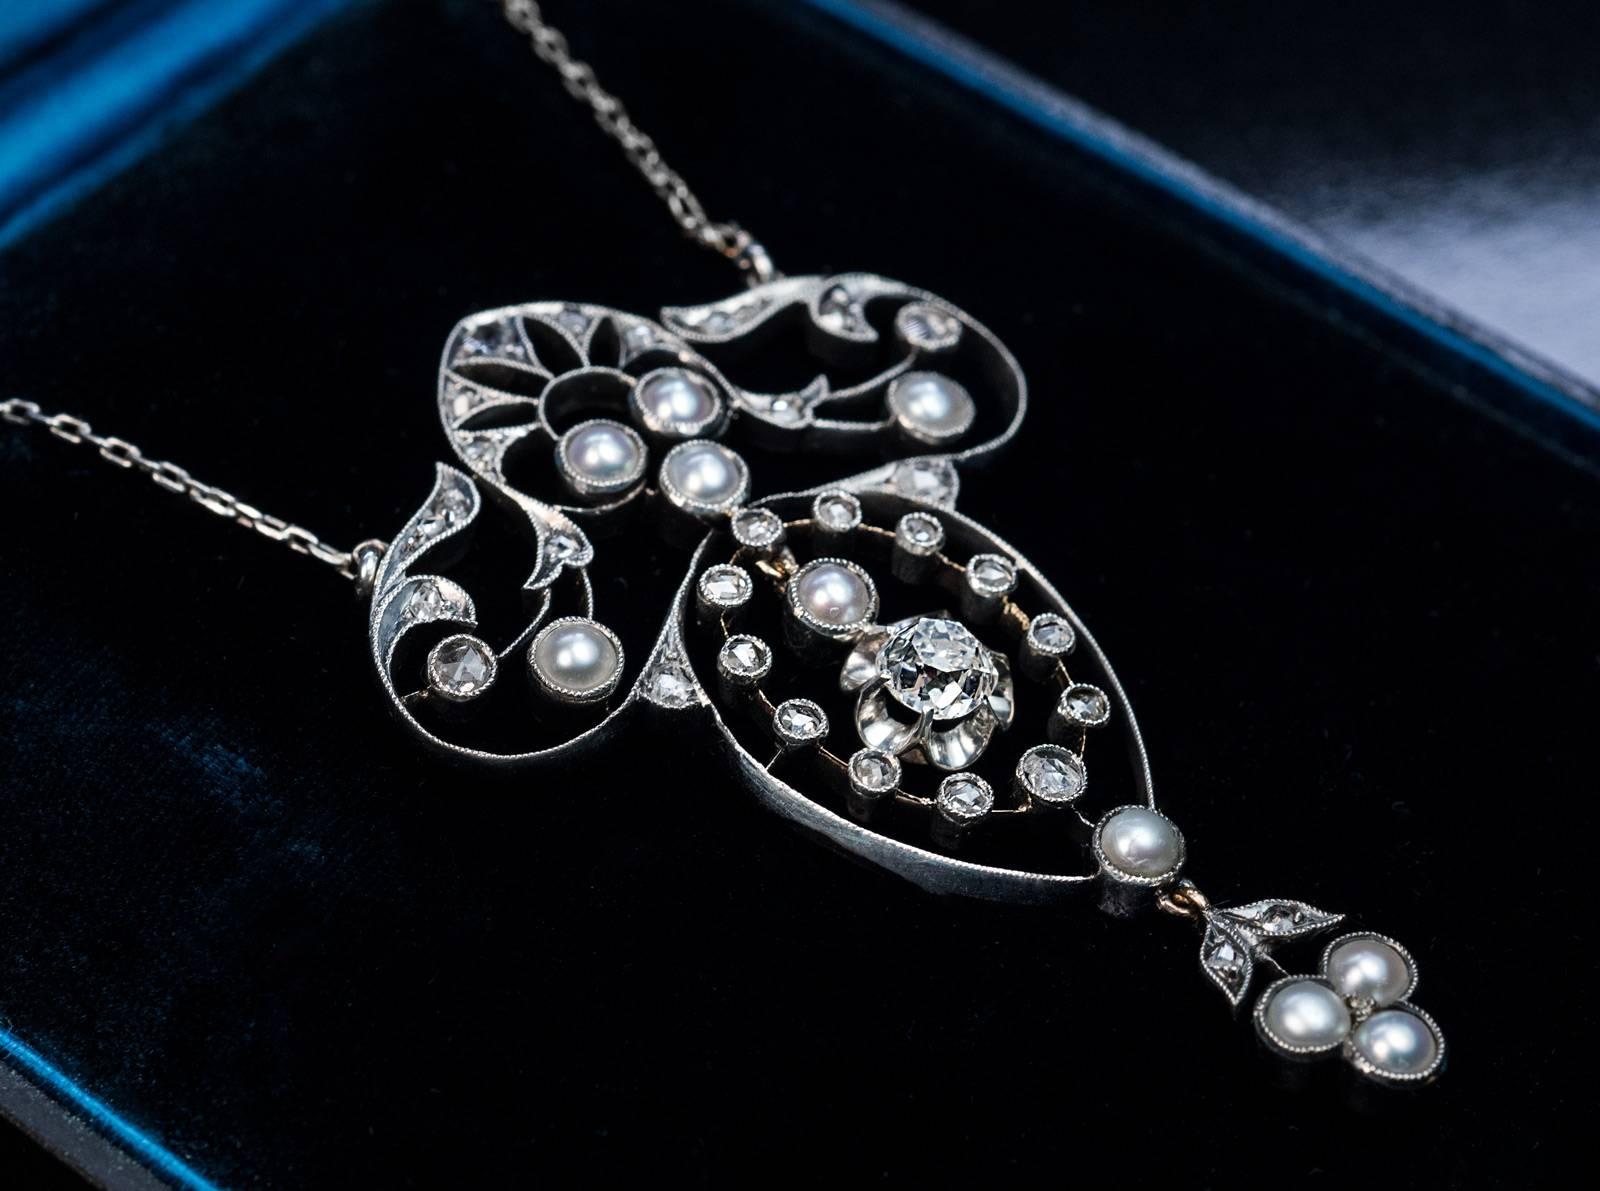 Circa 1905
An elegant antique Edwardian era pendant necklace is crafted in silver-topped gold and embellished with diamonds and half pearls. The pendant is centered with a dangling bright white old cushion cut diamond (measuring 5.1 x 5 x 3.95 mm,